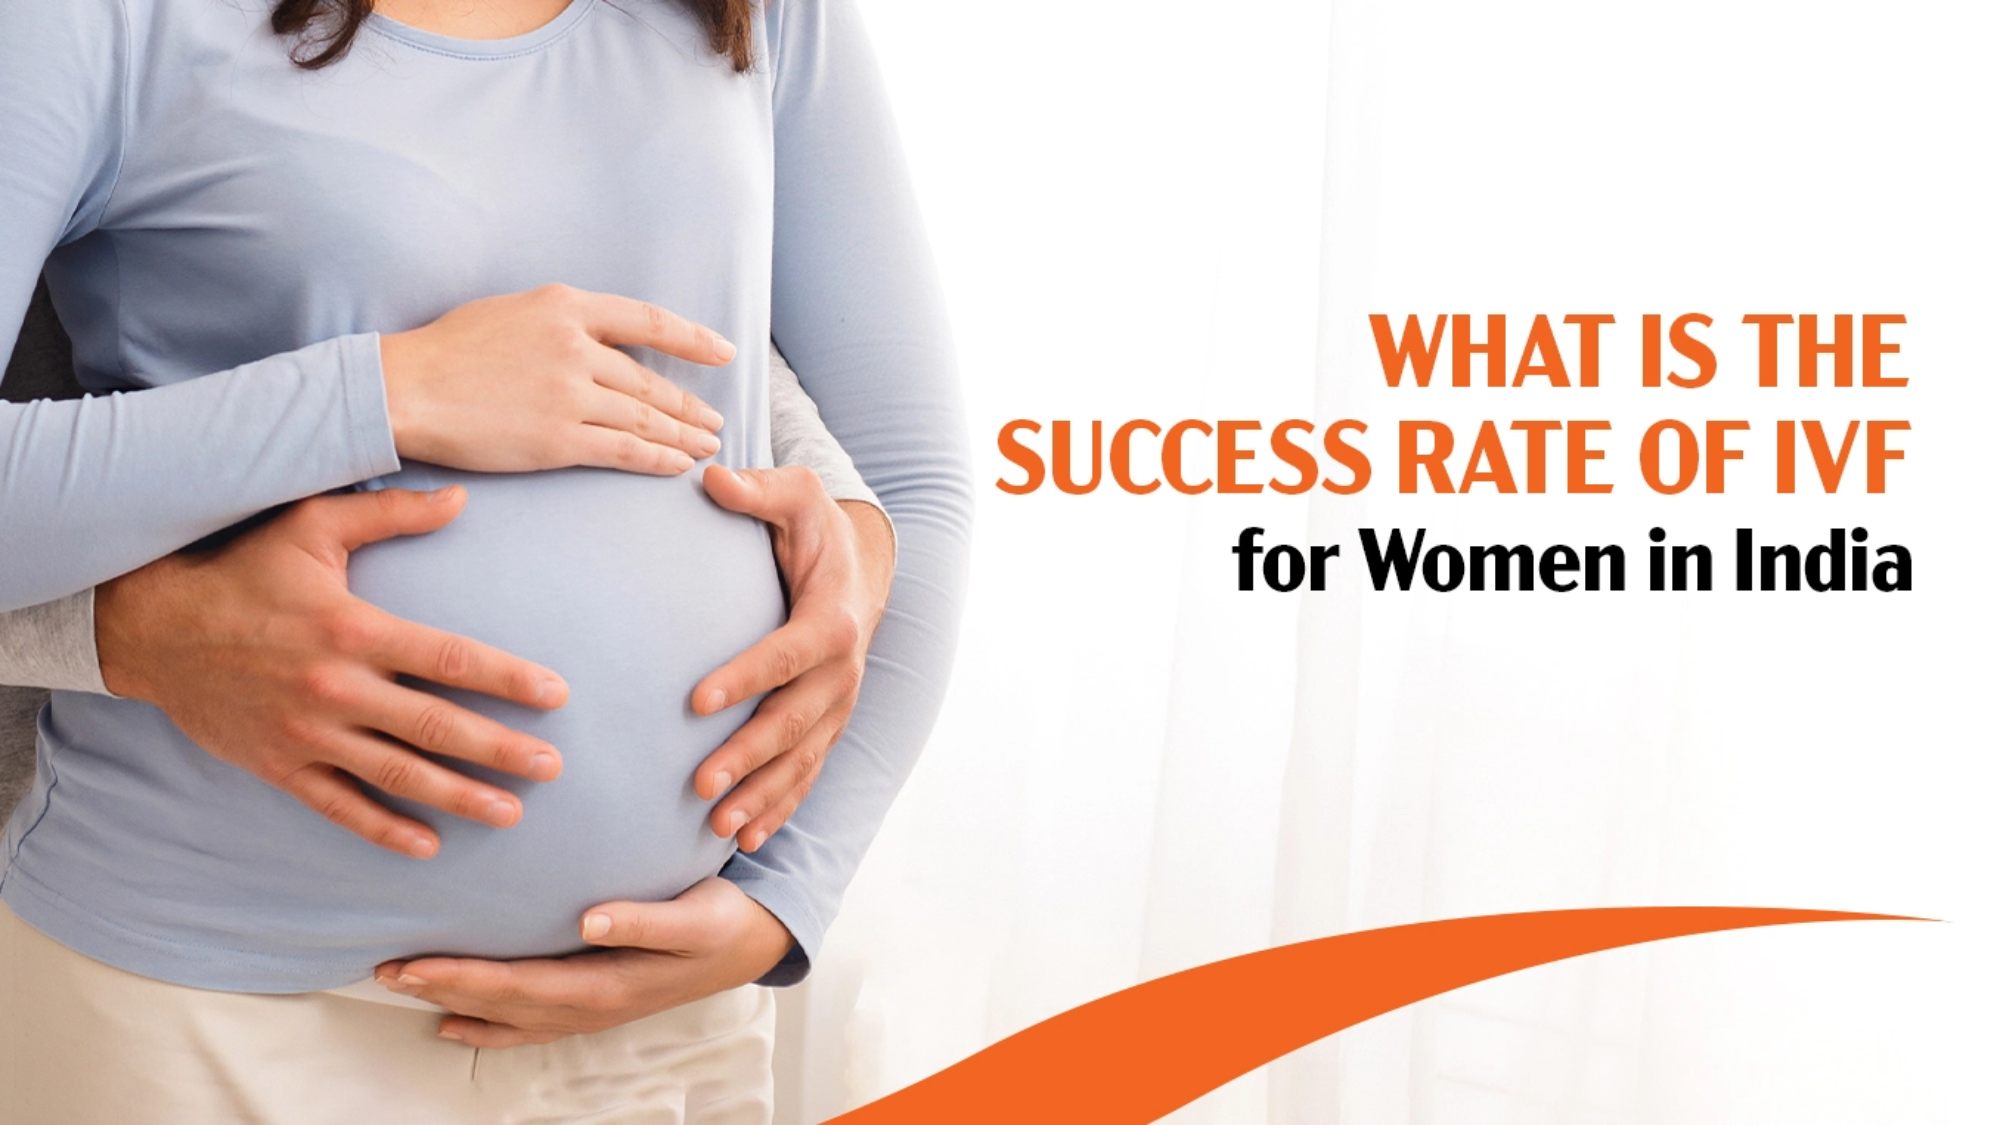 What Is the Success Rate of IVF for Women in India